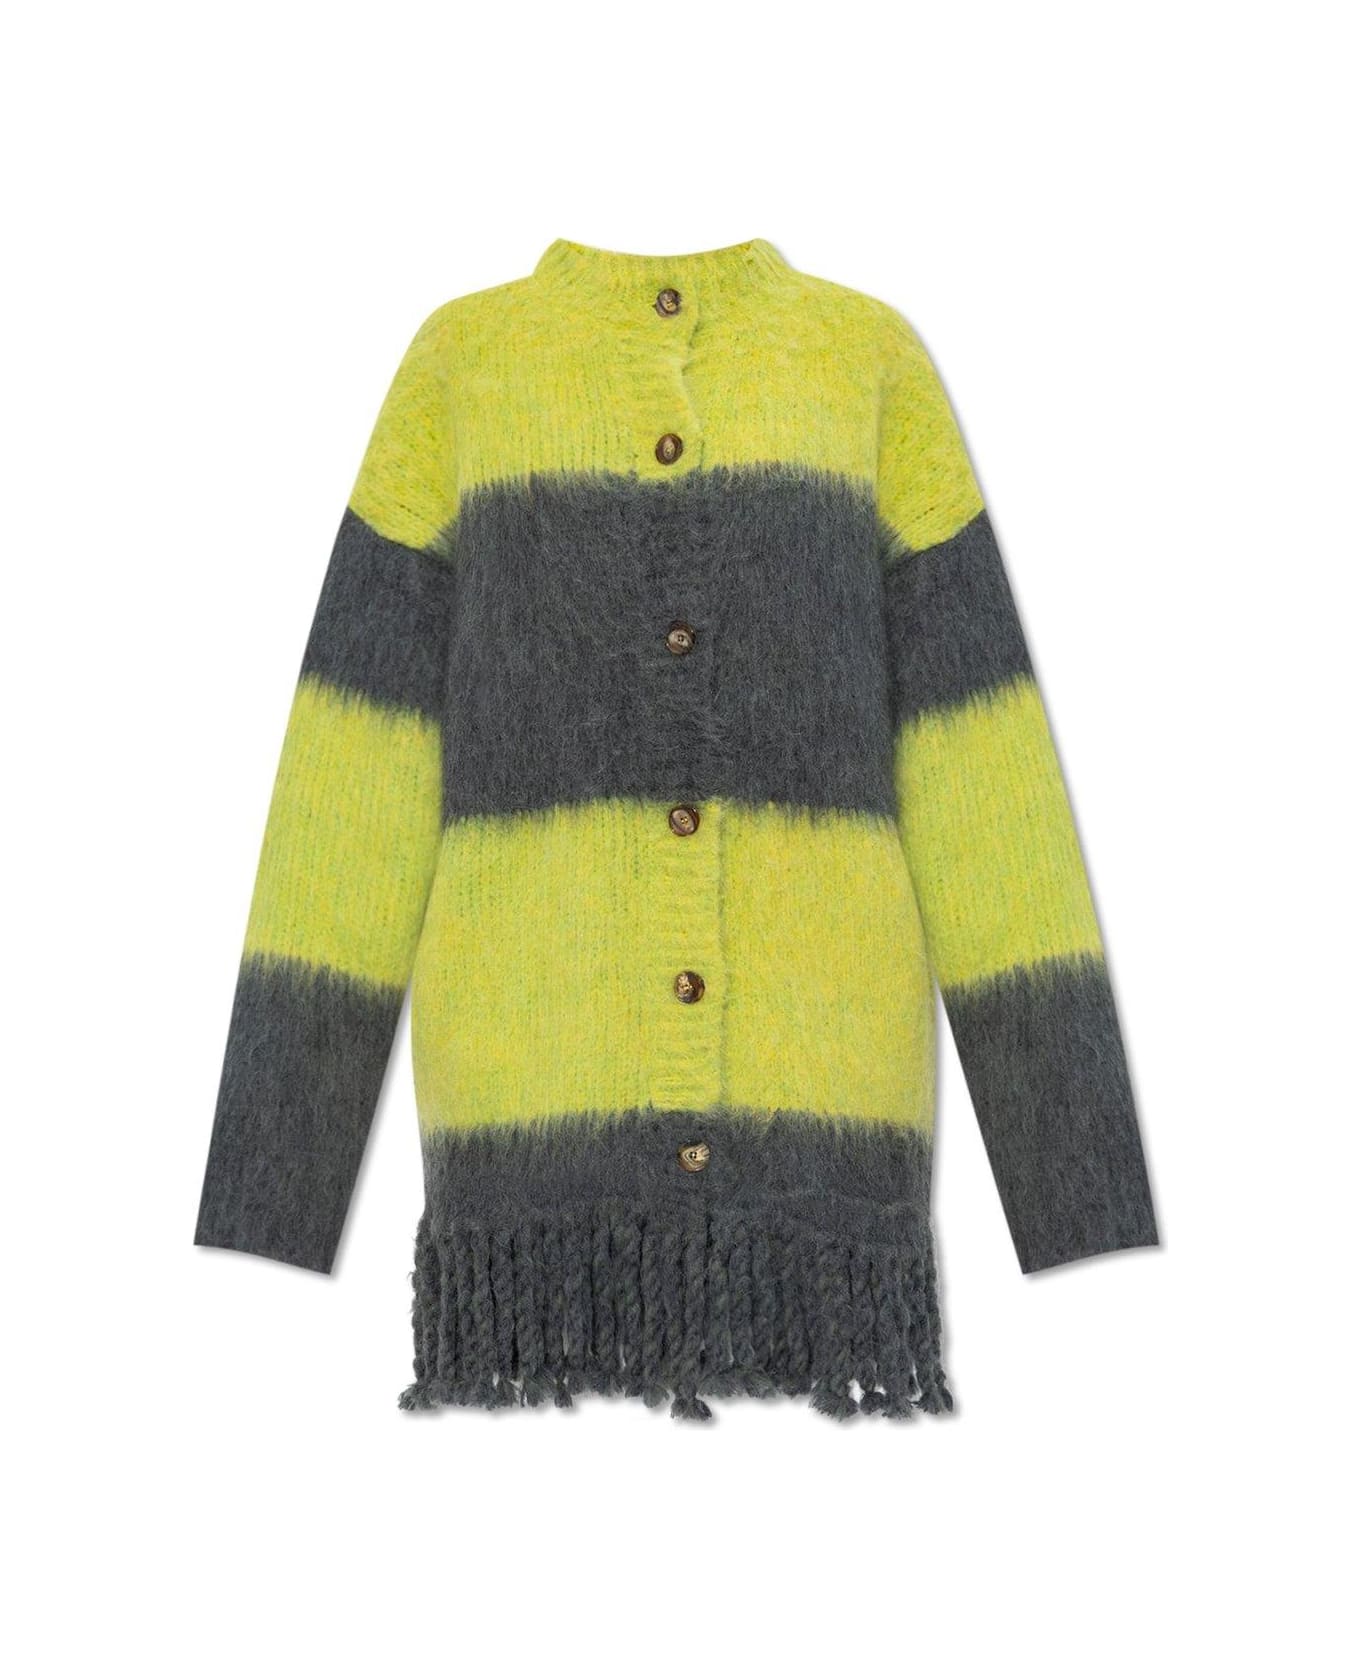 Etro Striped Fringed Button-up Cardigan